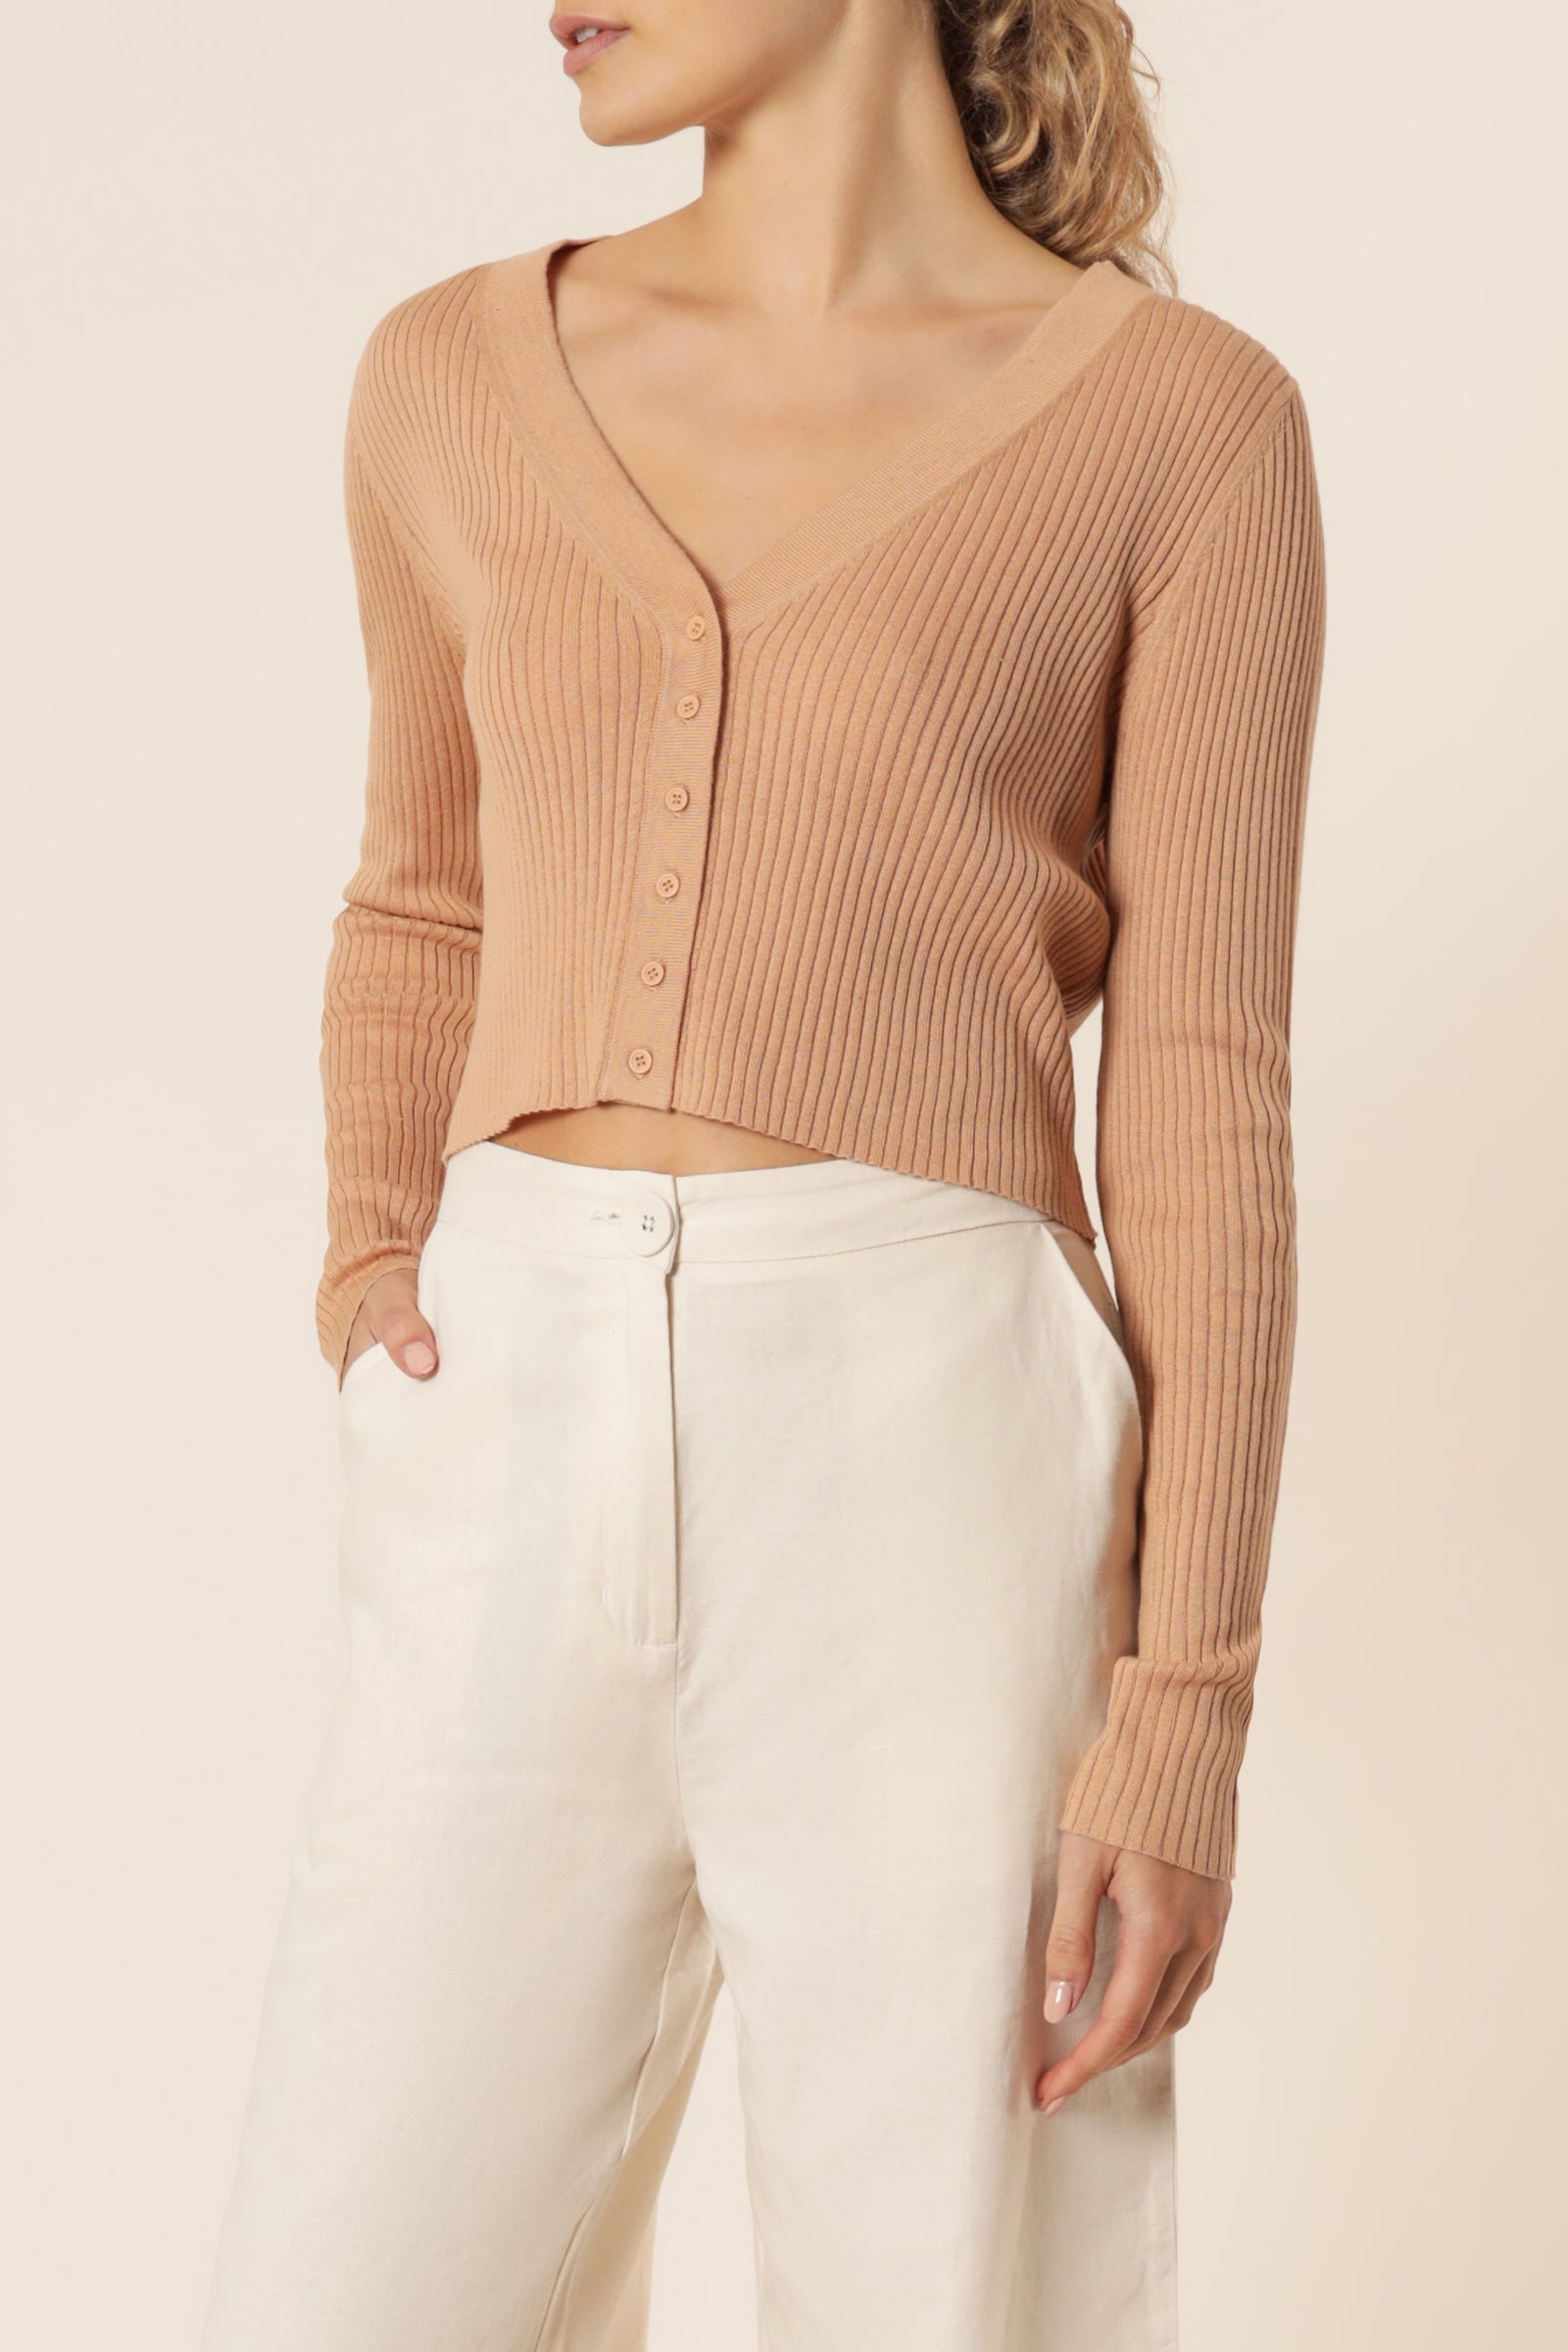 Nude Lucy Alma Cardi Biscuit Knits 